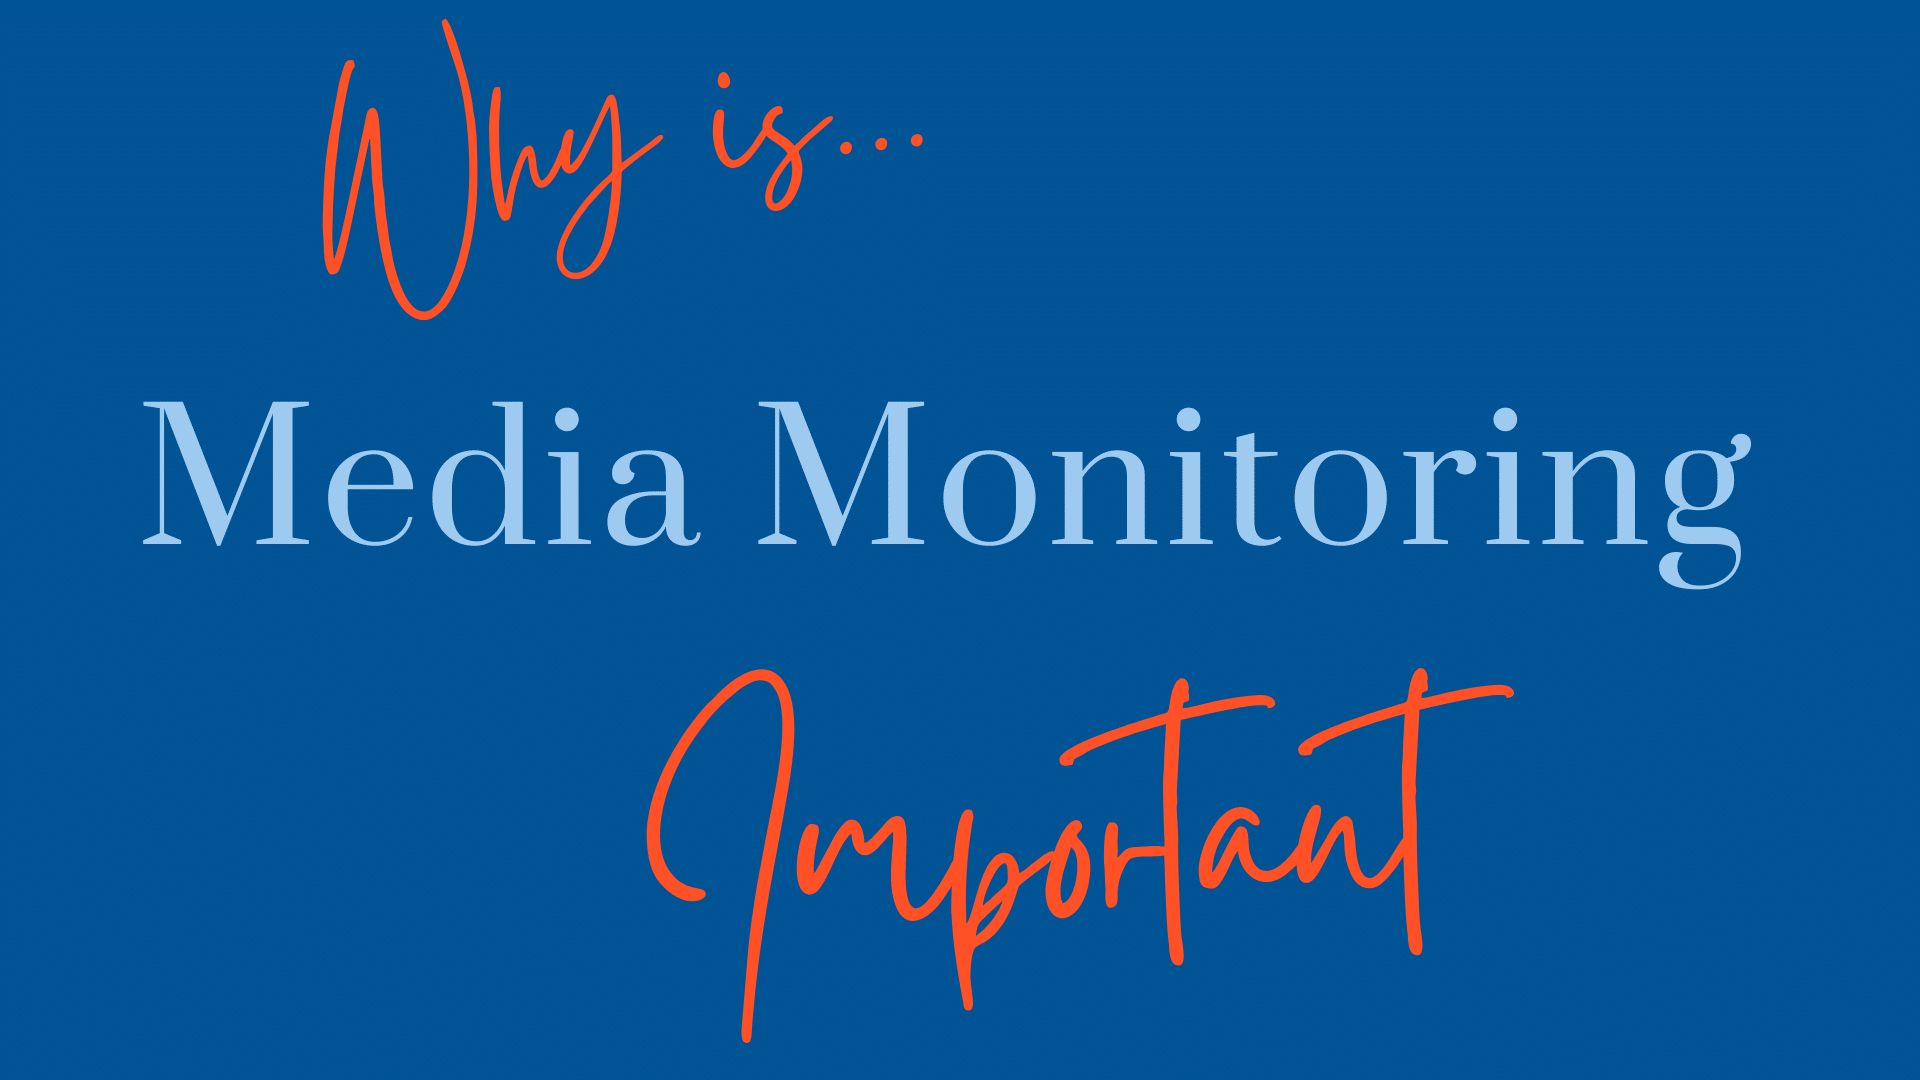 Why is media monitoring important?